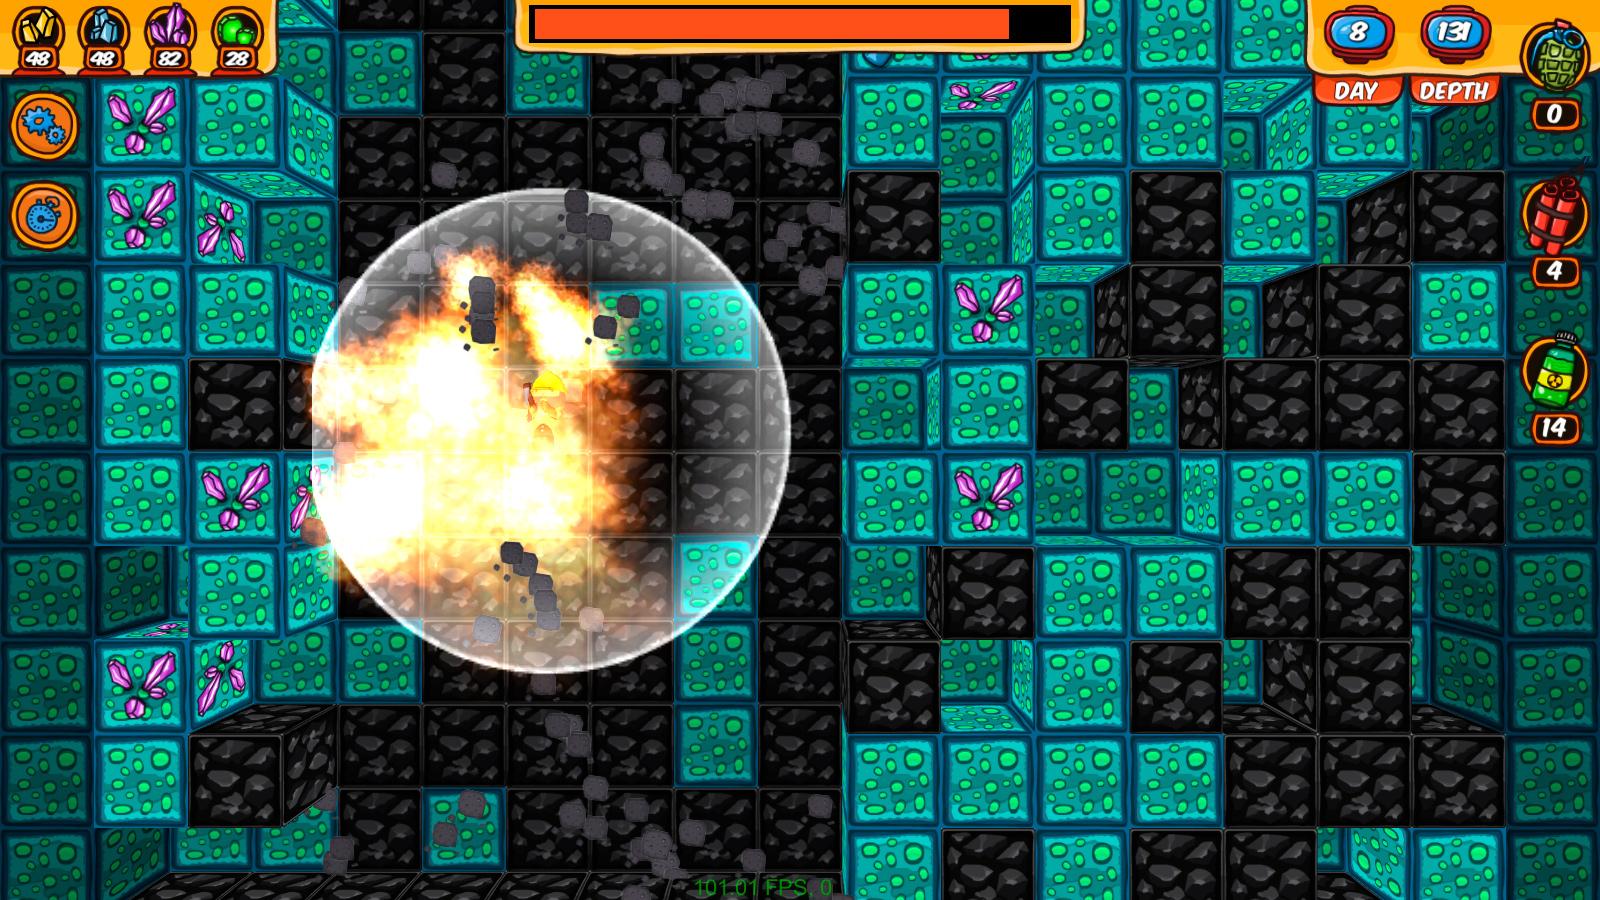 Screenshot №3 from game Mad Digger